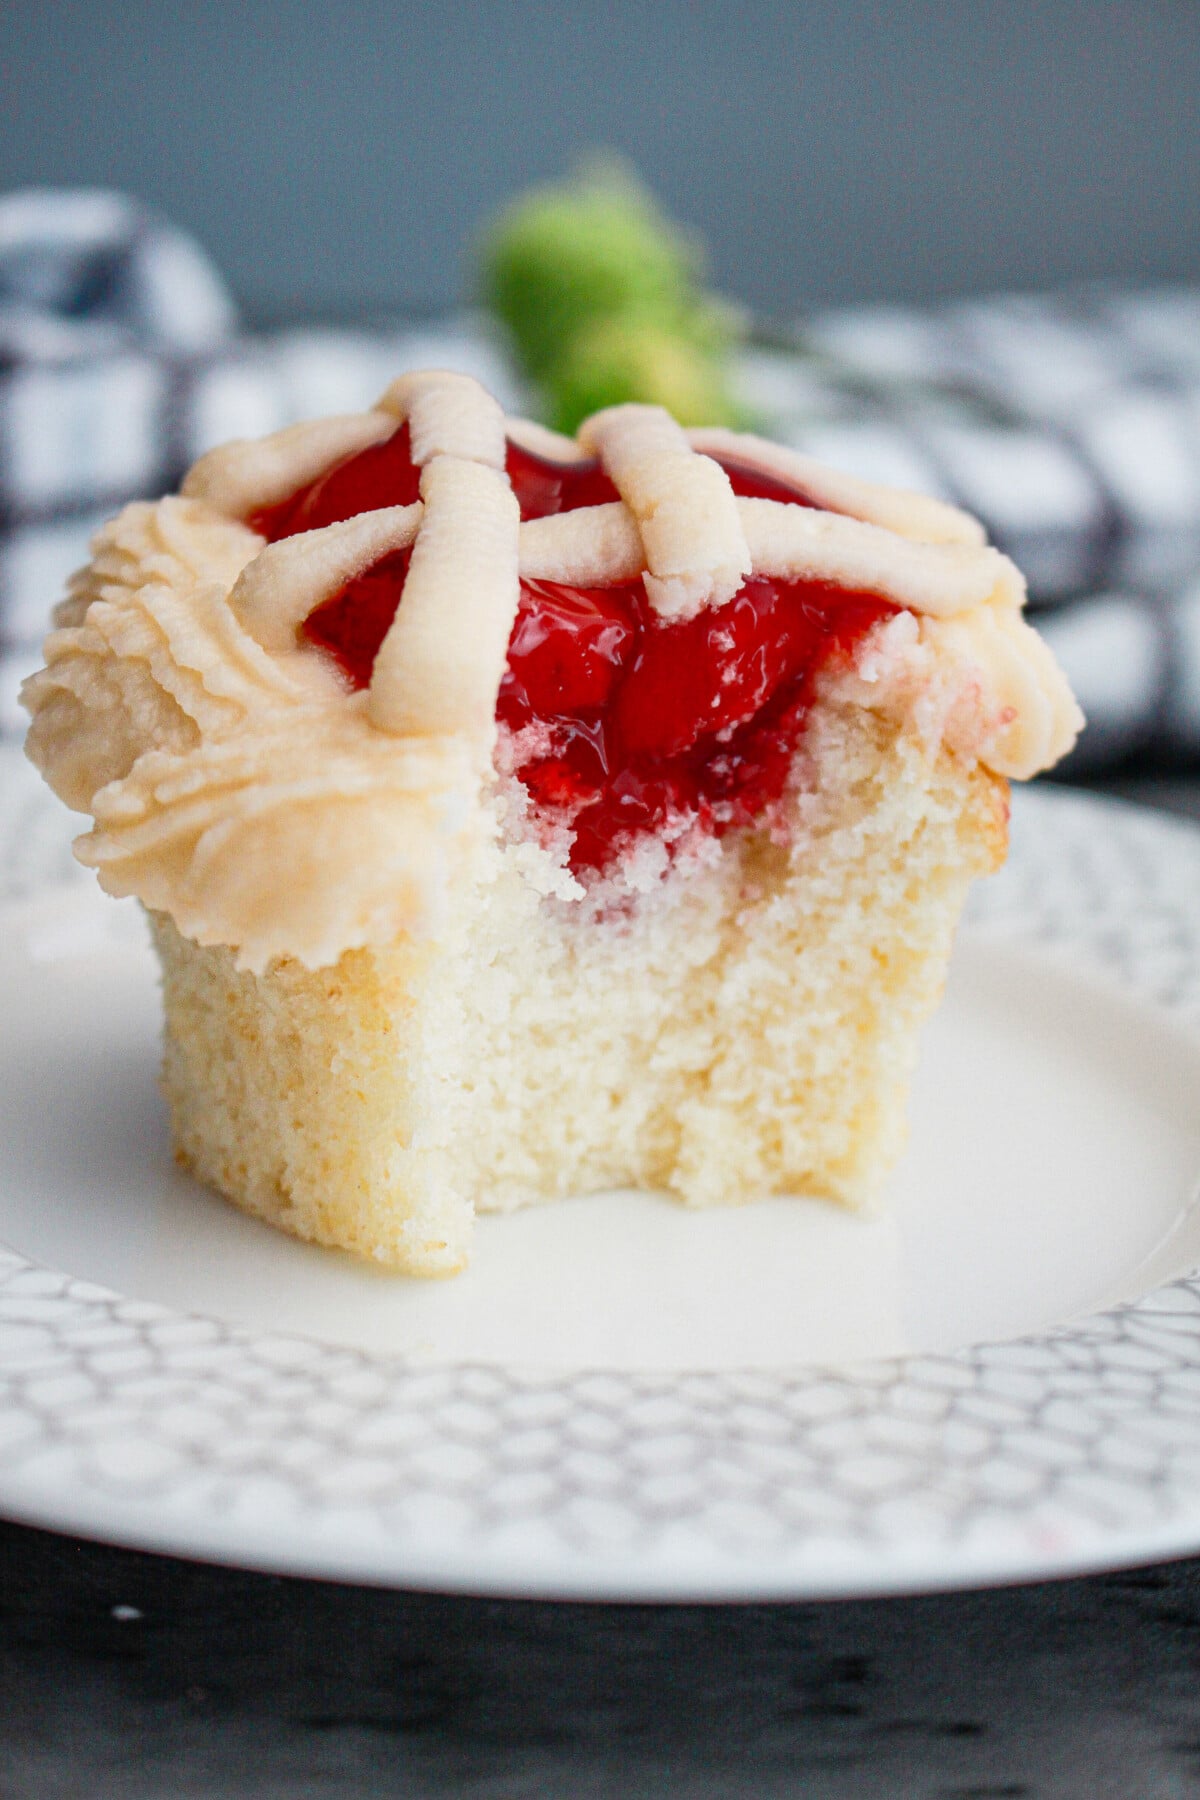 Cherry pie Cupcakes with a bite taken out